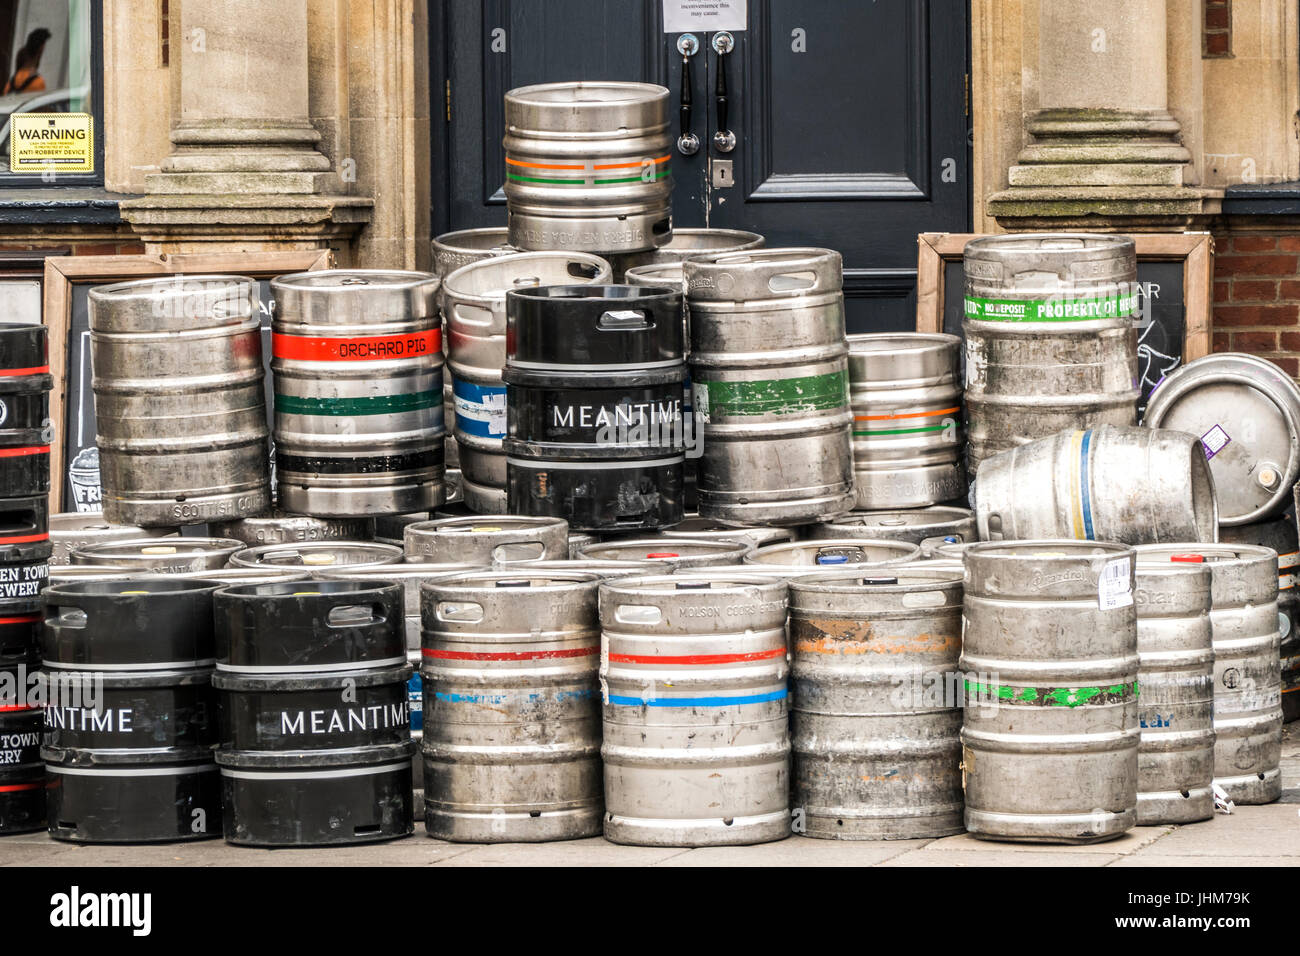 Beer barrels stacked up after delivery, outside a pub in Ealing Broadway, London W5, England, UK. Stock Photo